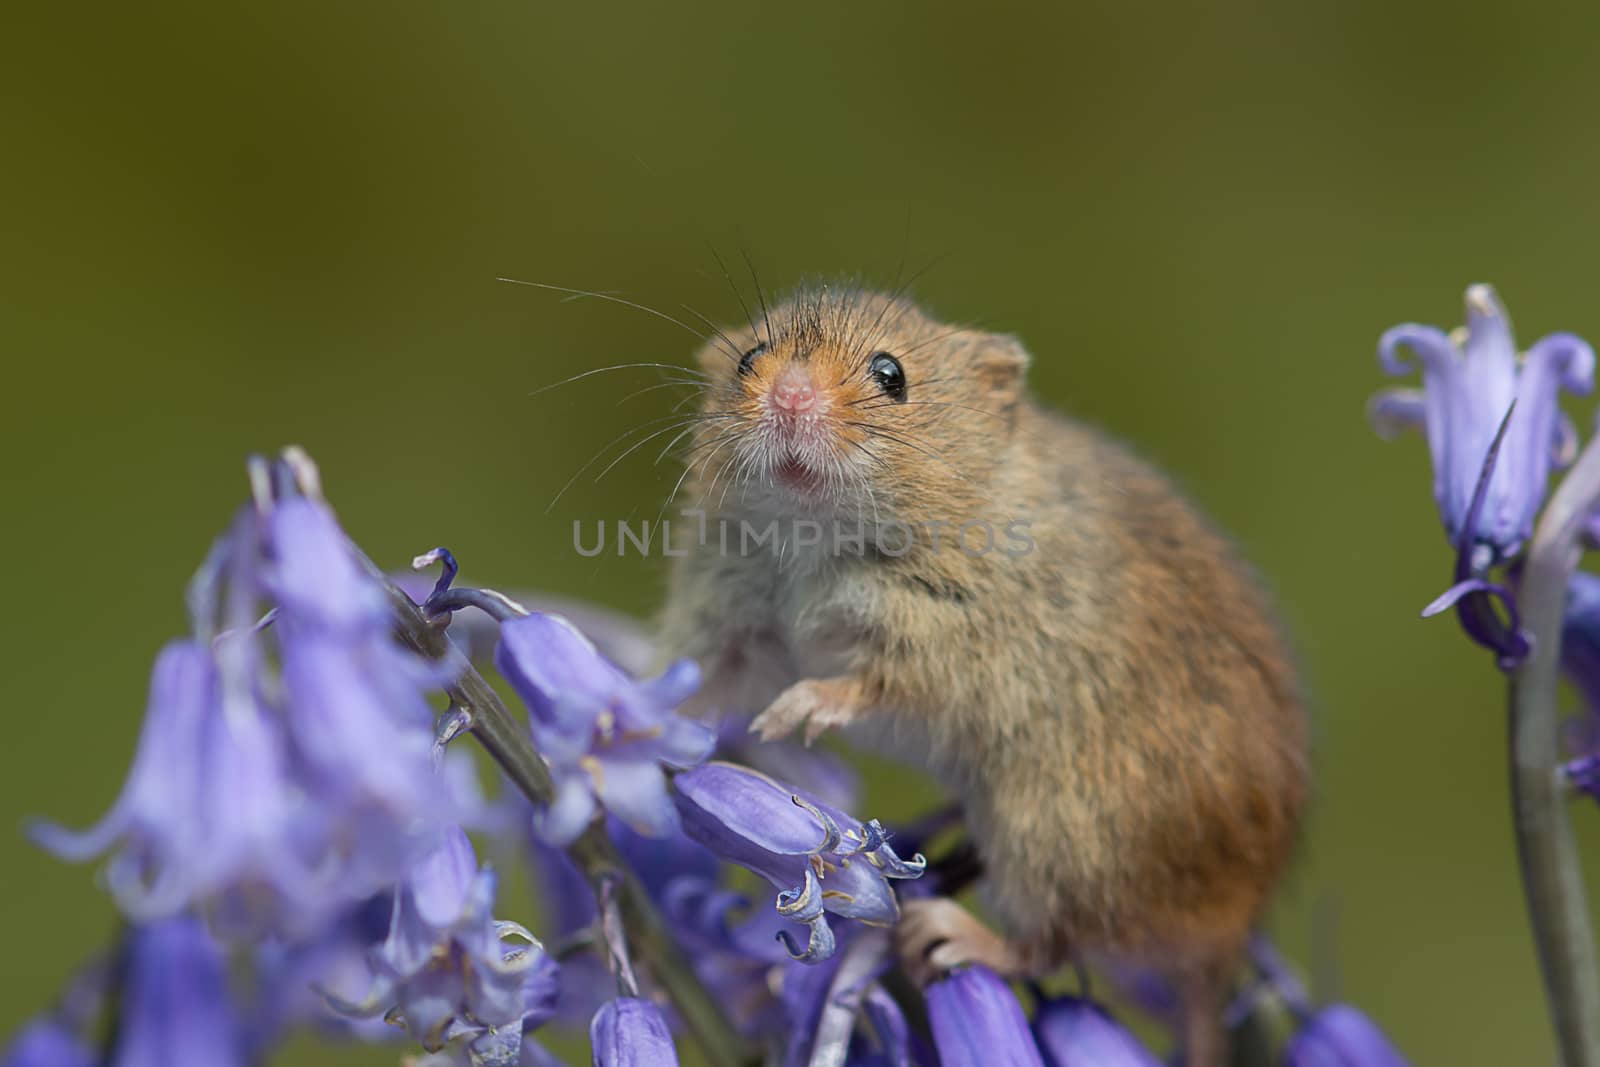 A close portrait of a harvest mouse climbing and balancing on bluebells